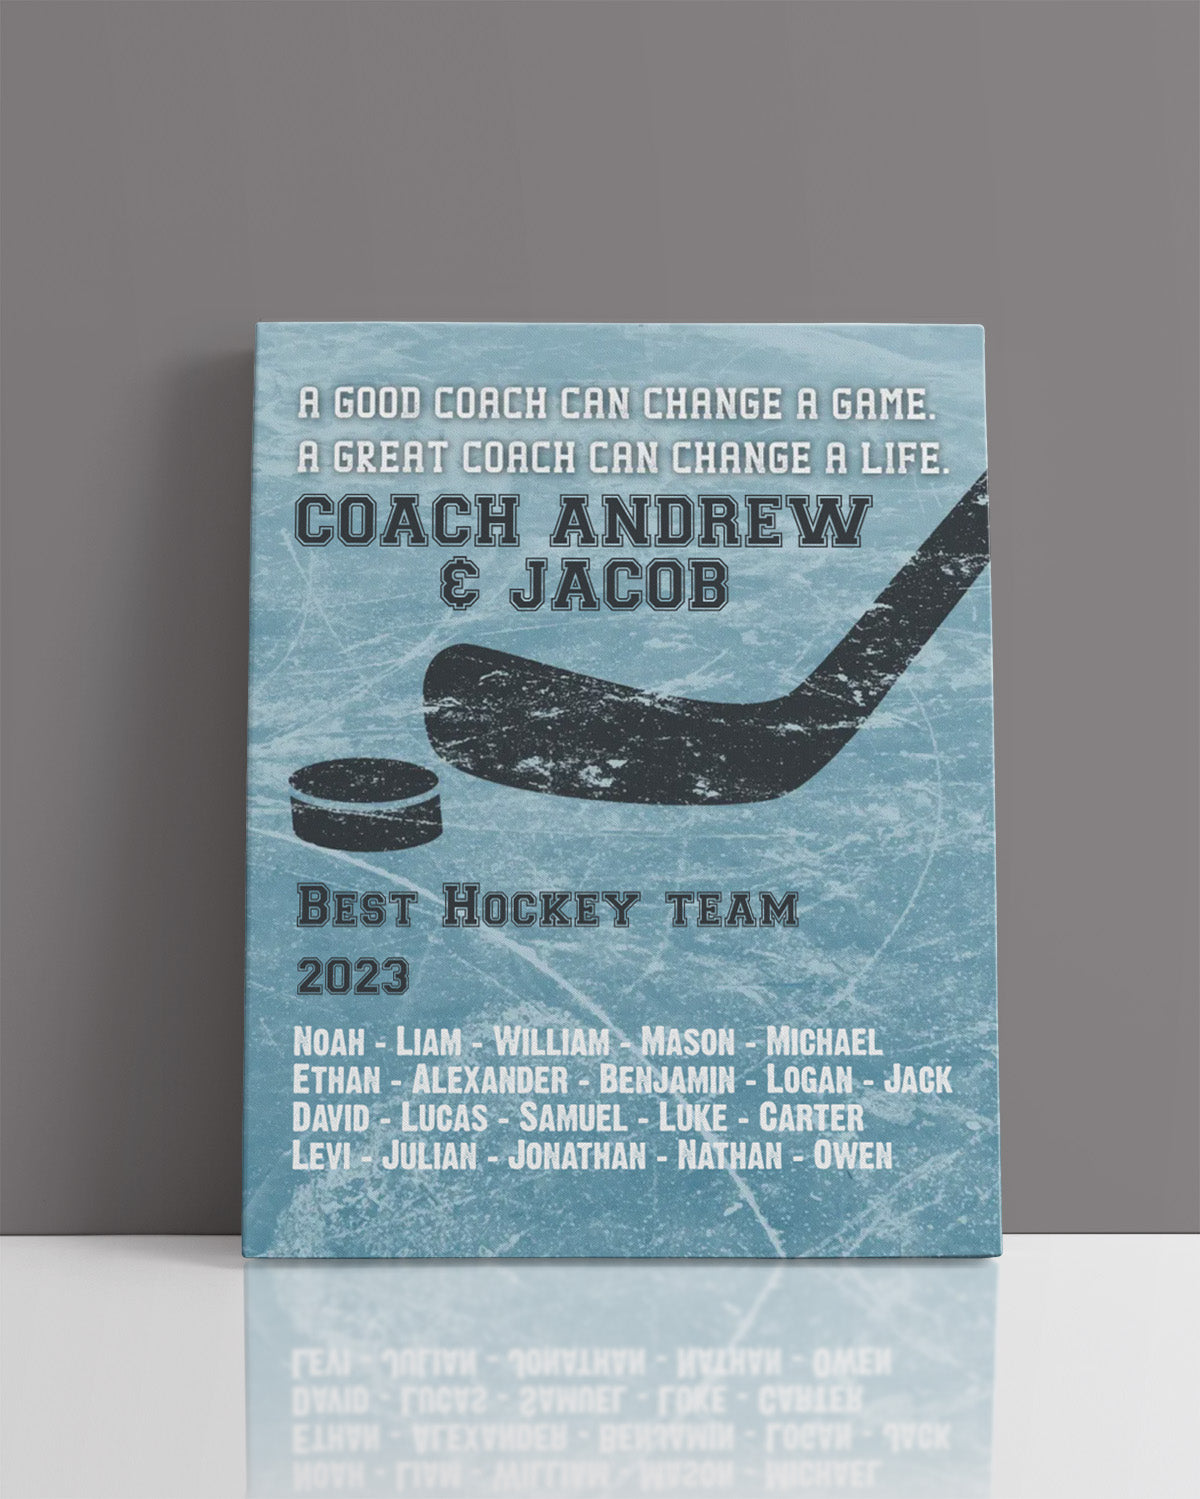 Hockey Coach Appreciation Gift - Customize With Athlete Names, Coach's Names, Team Name, Year or Season - Motivational Sports -  Coach's Quote